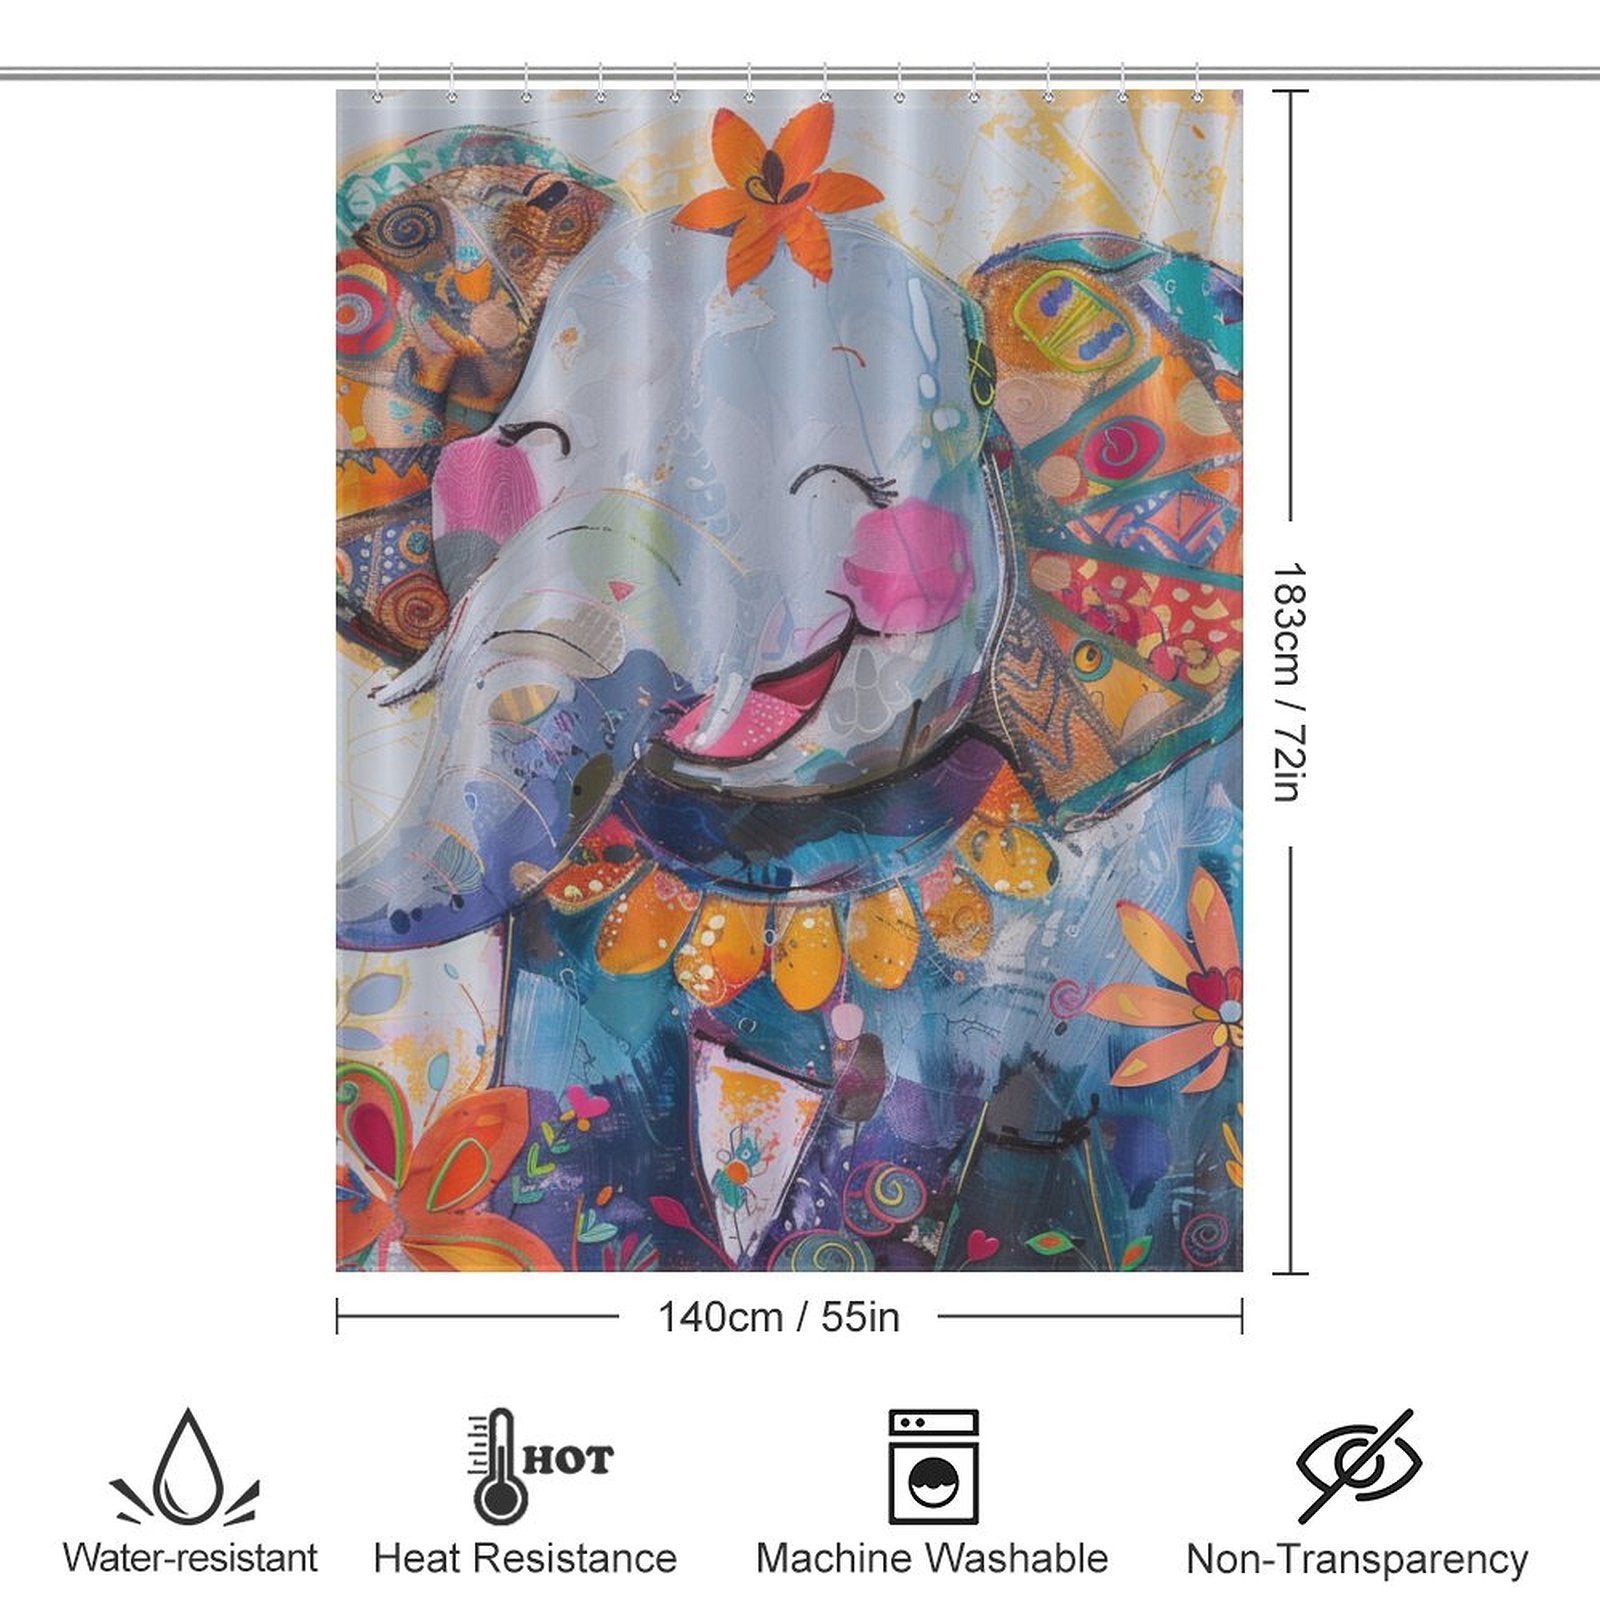 Colorful shower curtain featuring an artistic, joyful elephant design, perfect for adding charm to your bathroom decor. Adorned with flowers, this Cute Baby Happy Elephant and Flowers Shower Curtain-Cottoncat measures 183 cm tall by 140 cm wide. Icons indicate it's water-resistant, heat-resistant, machine washable, and non-transparent.